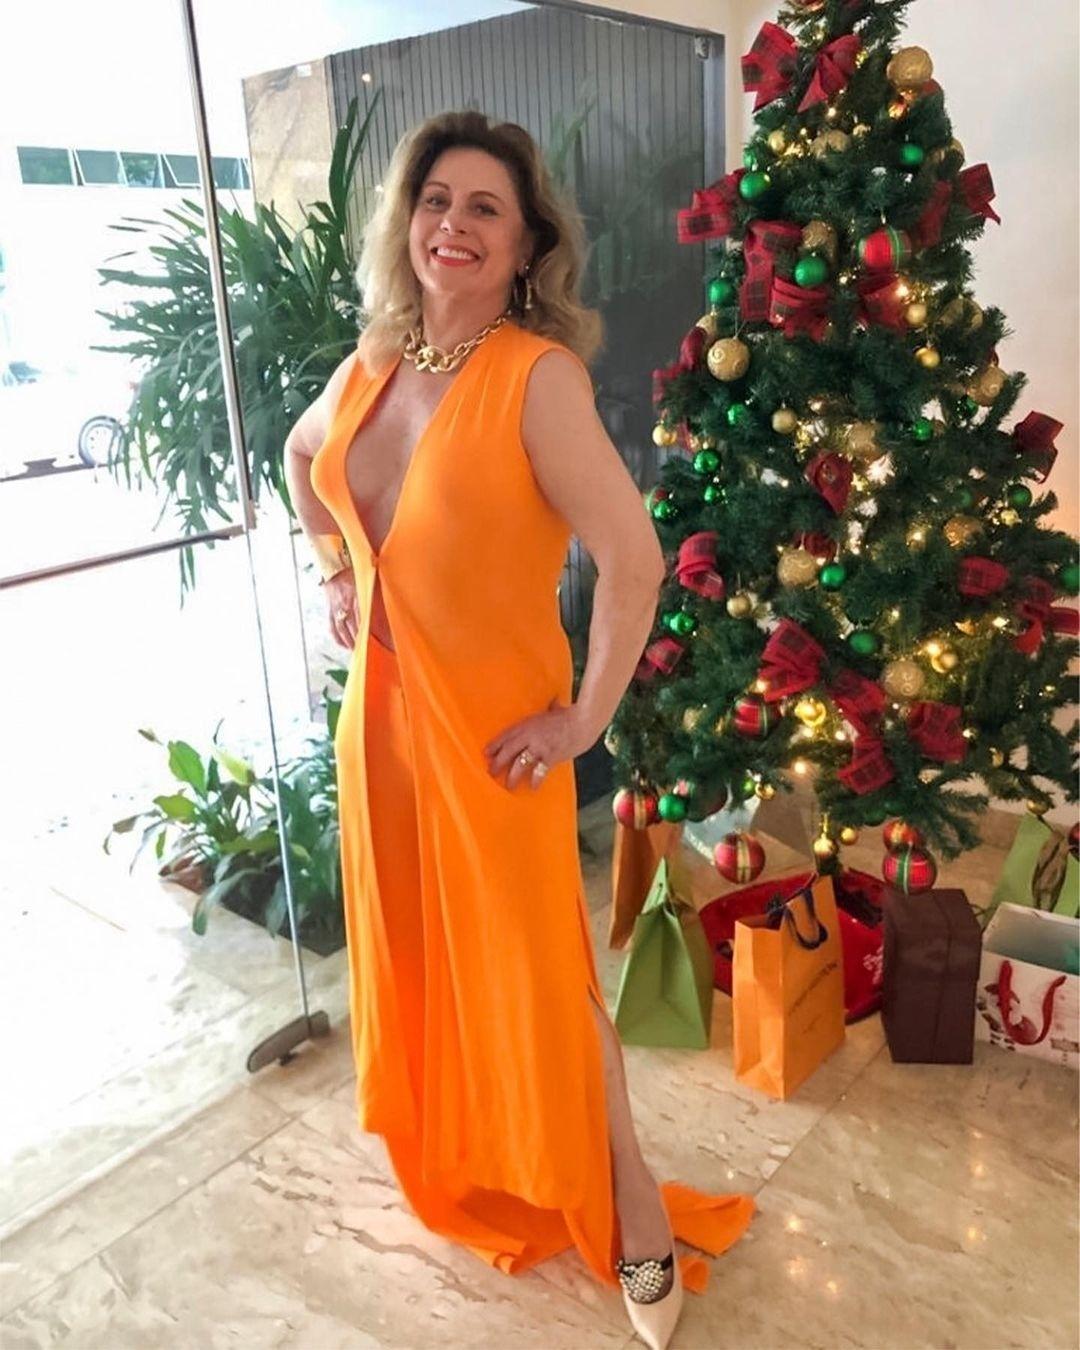 Vera Fisher standing in front of the Christmas tree with an orange hole - clone / Instagram